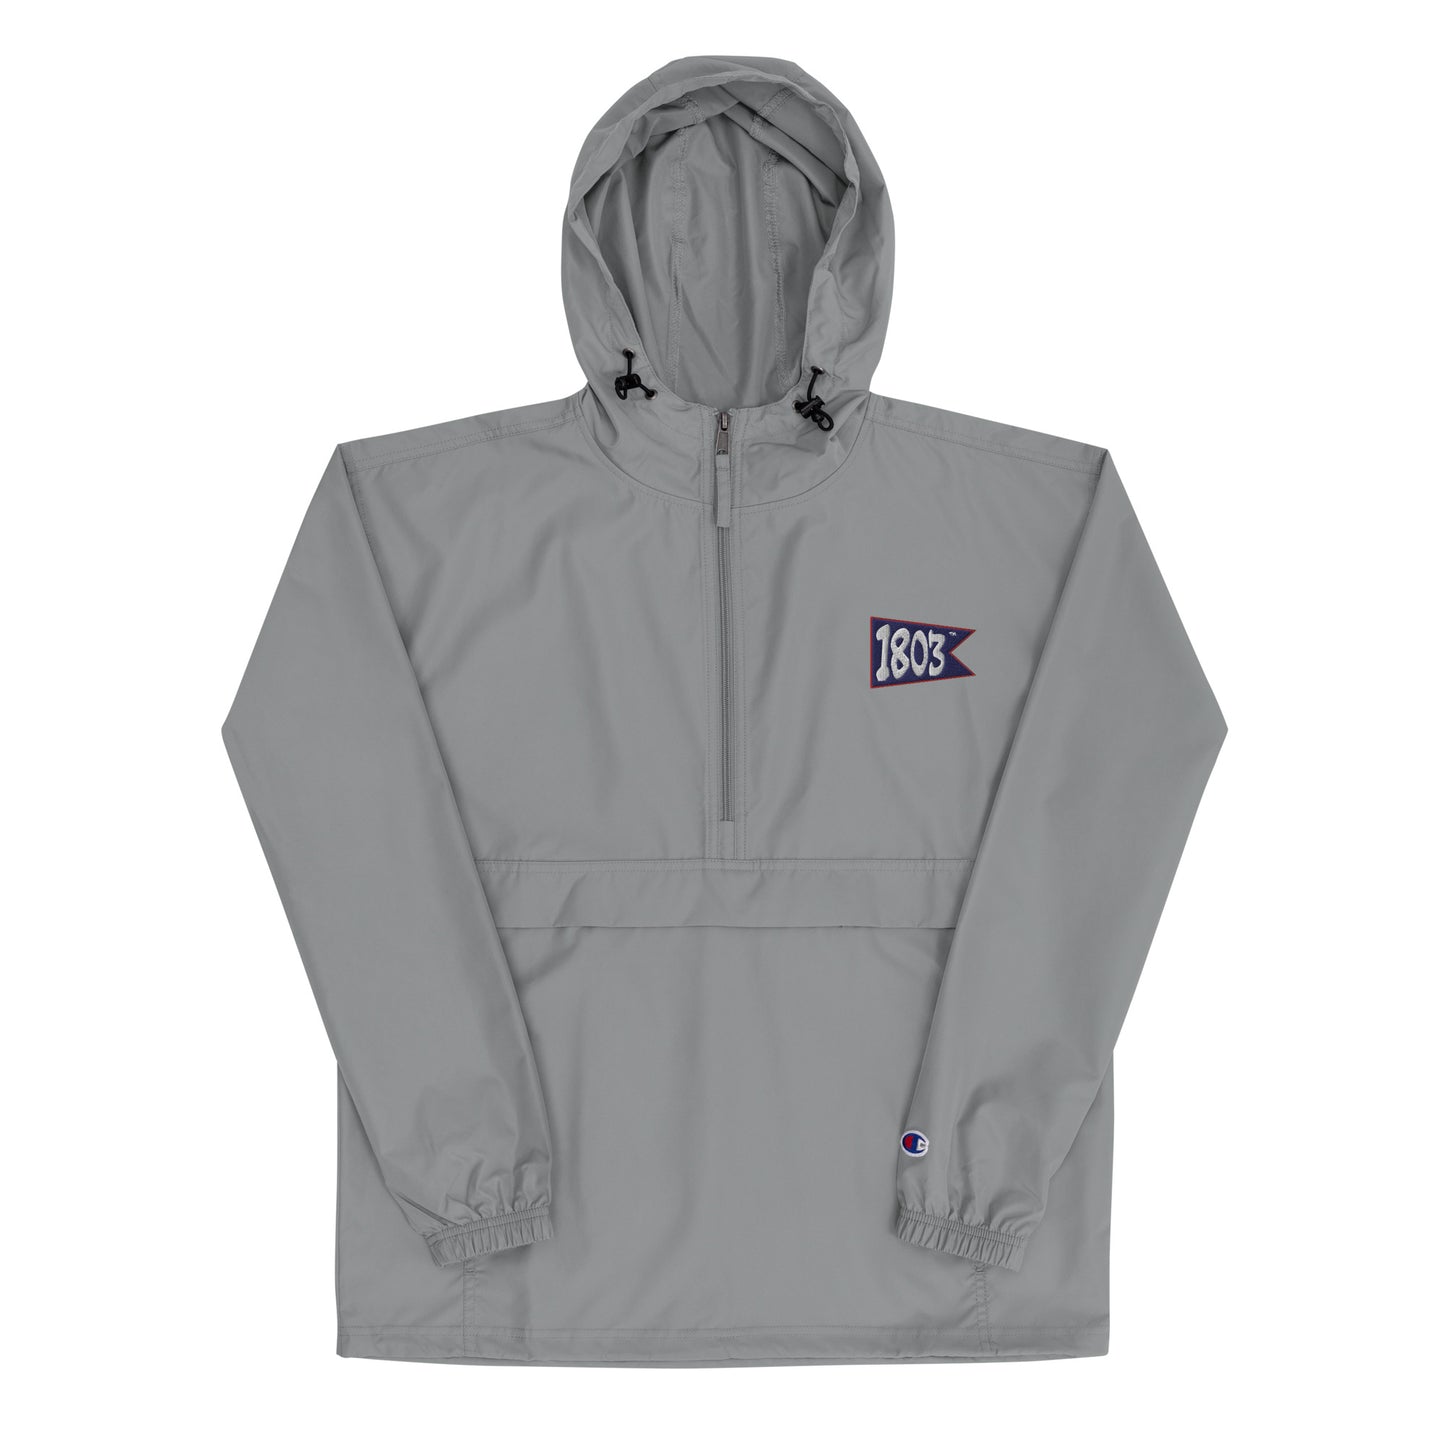 1803 Champion Embroidered Packable Rain Jacket